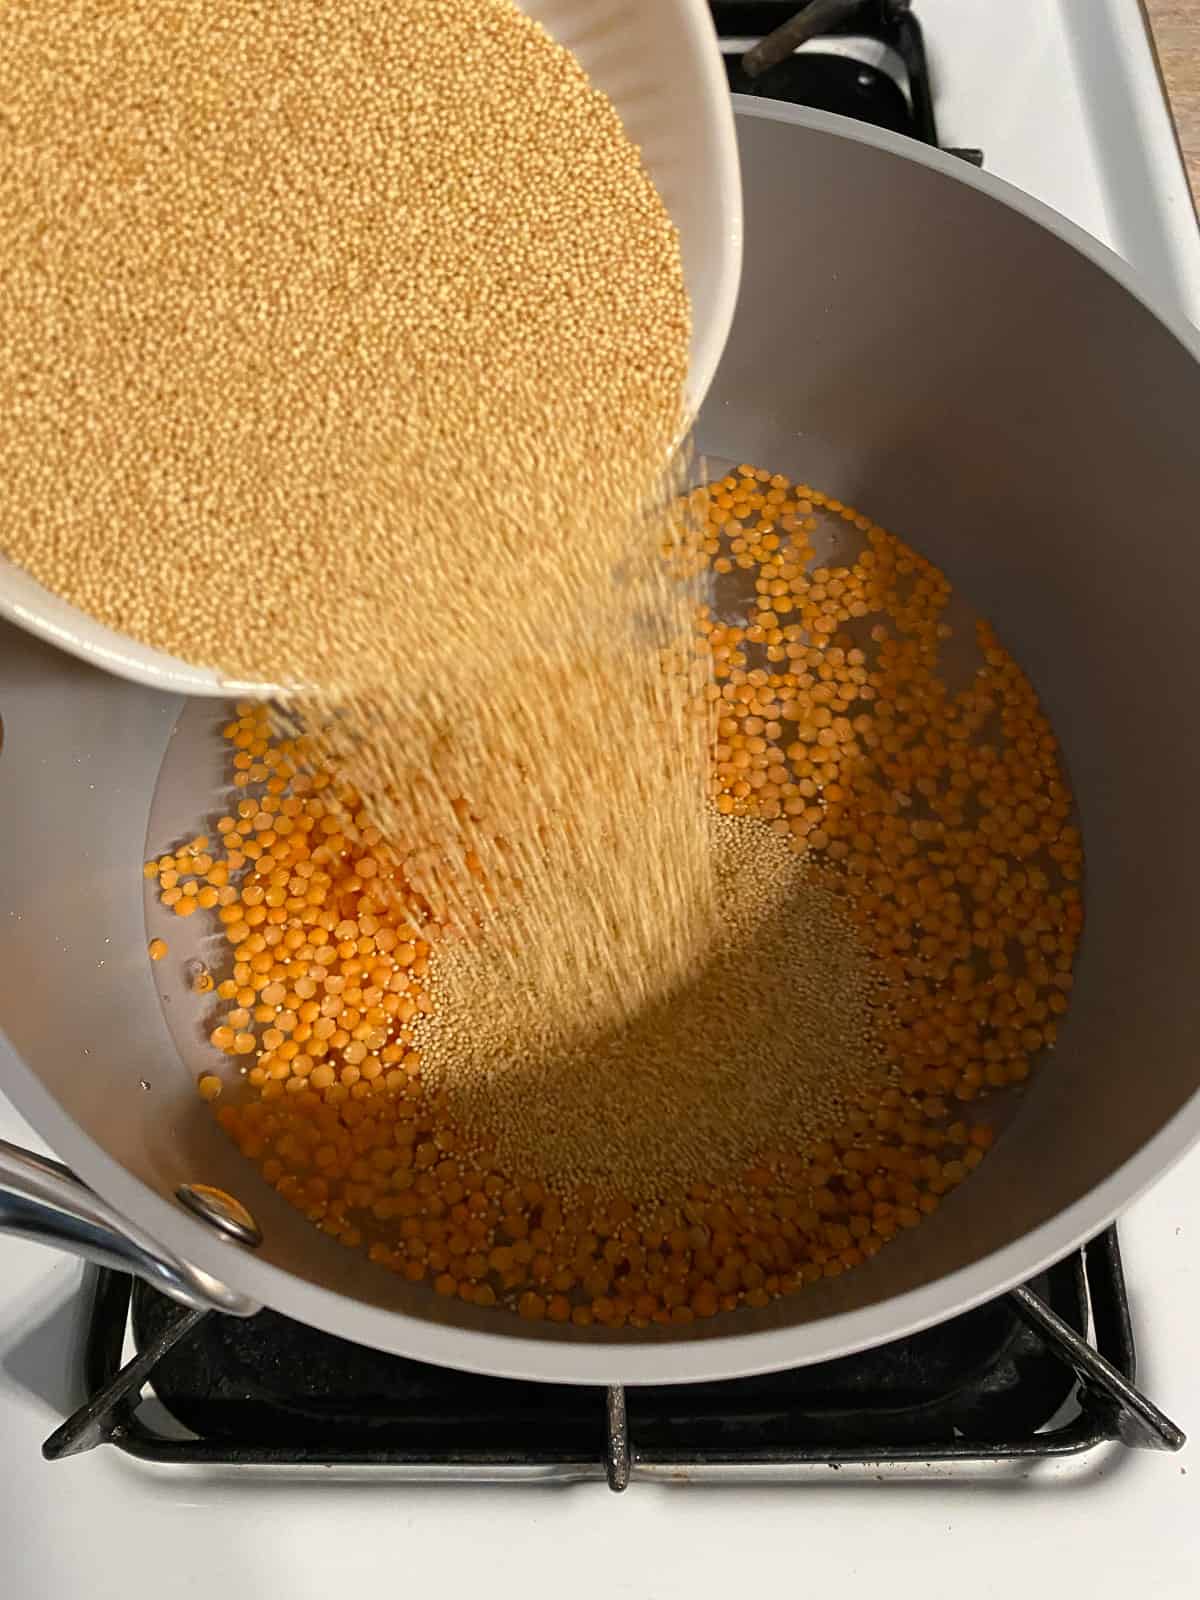 process of adding lentils to bowl